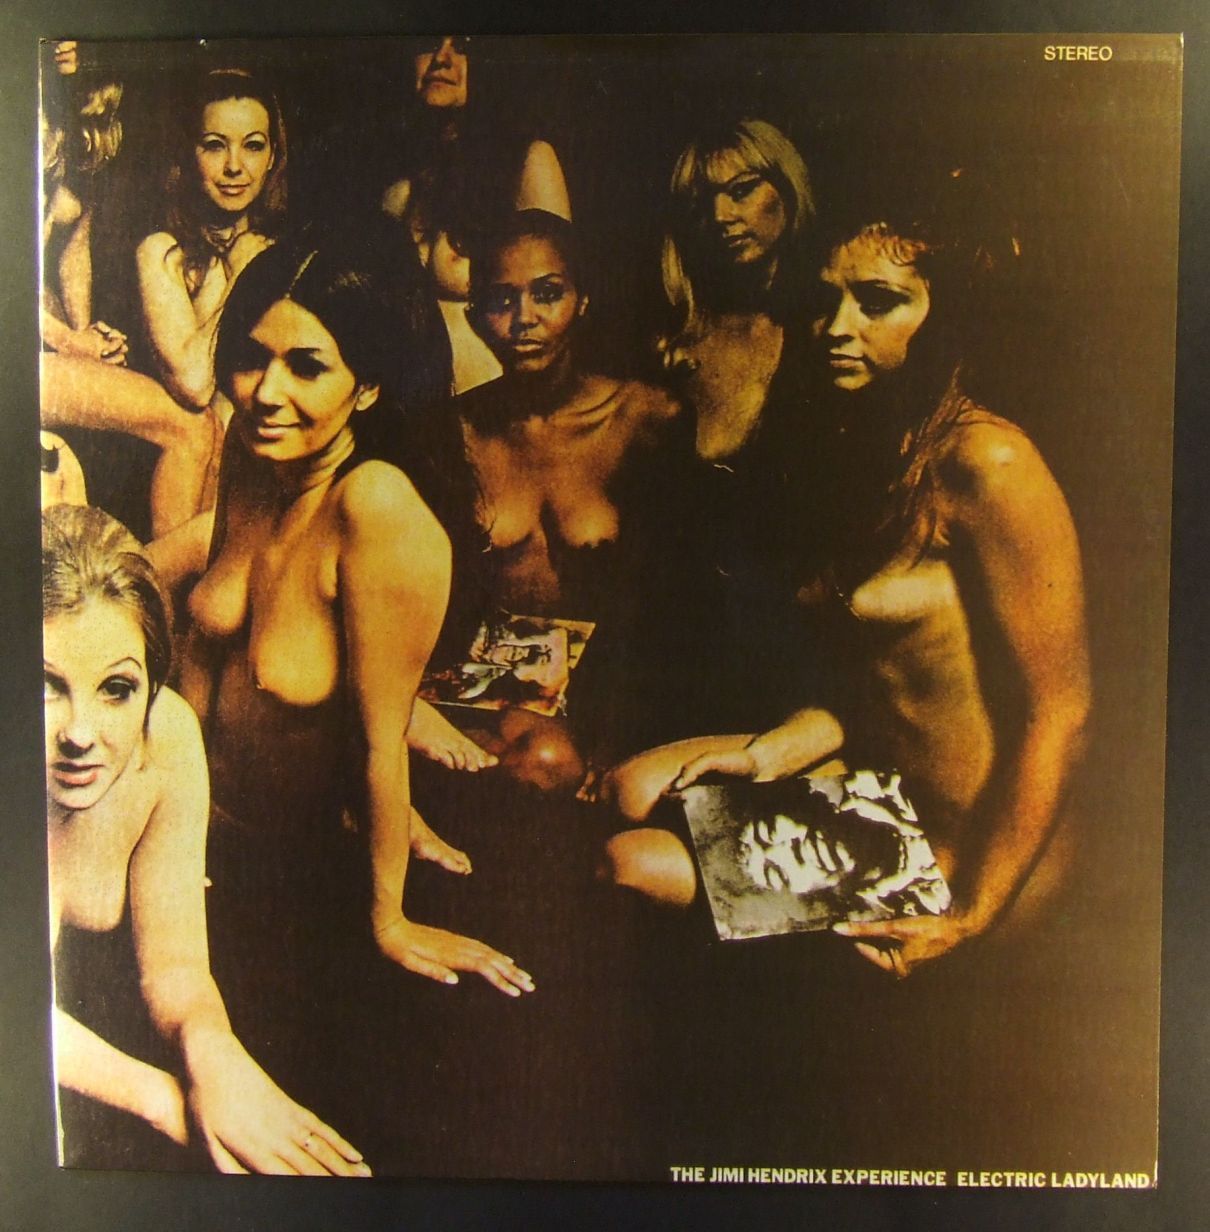 The Jimi Hendrix Experience. Electric Ladyland